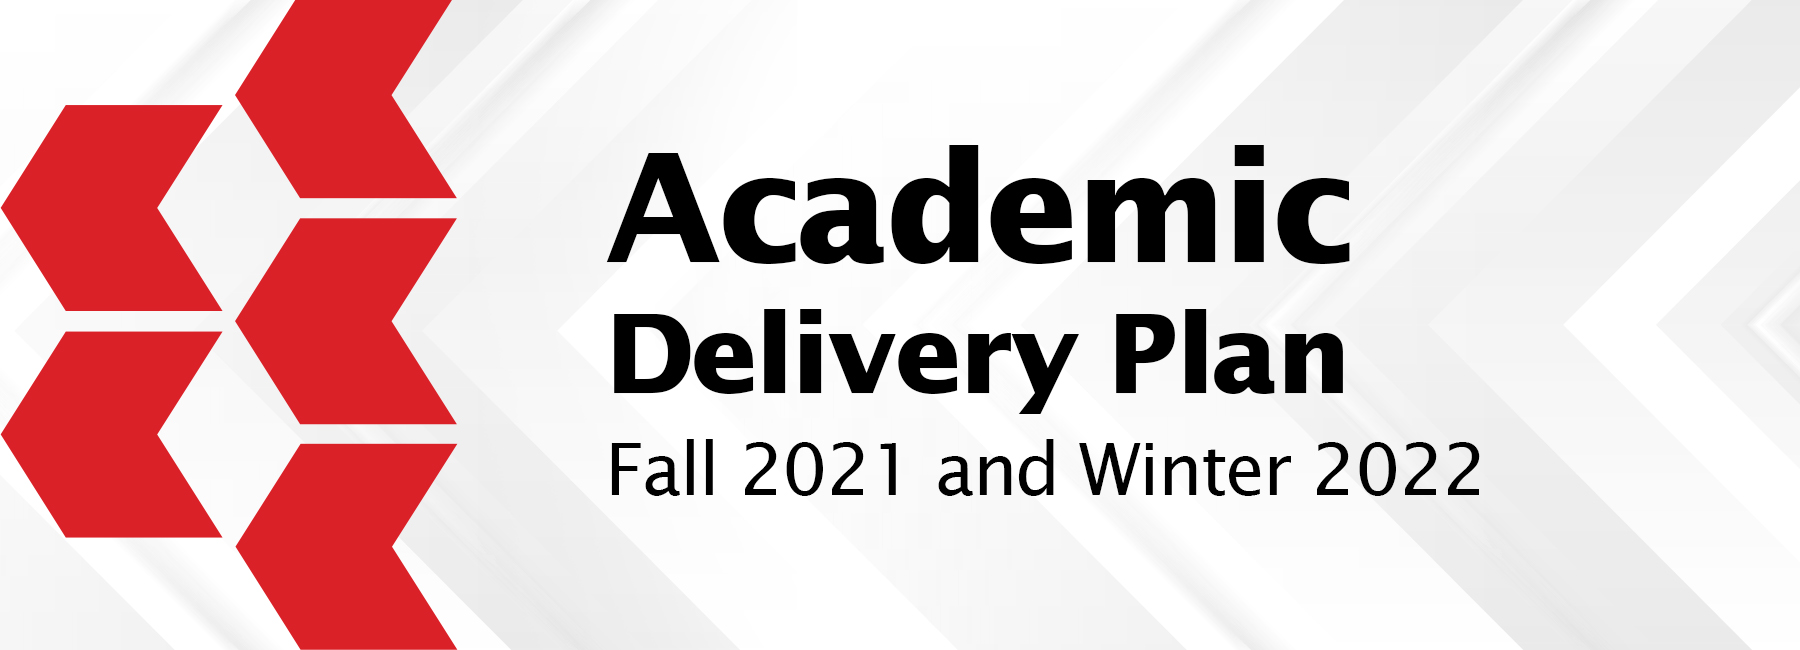 Academic Delivery Plan